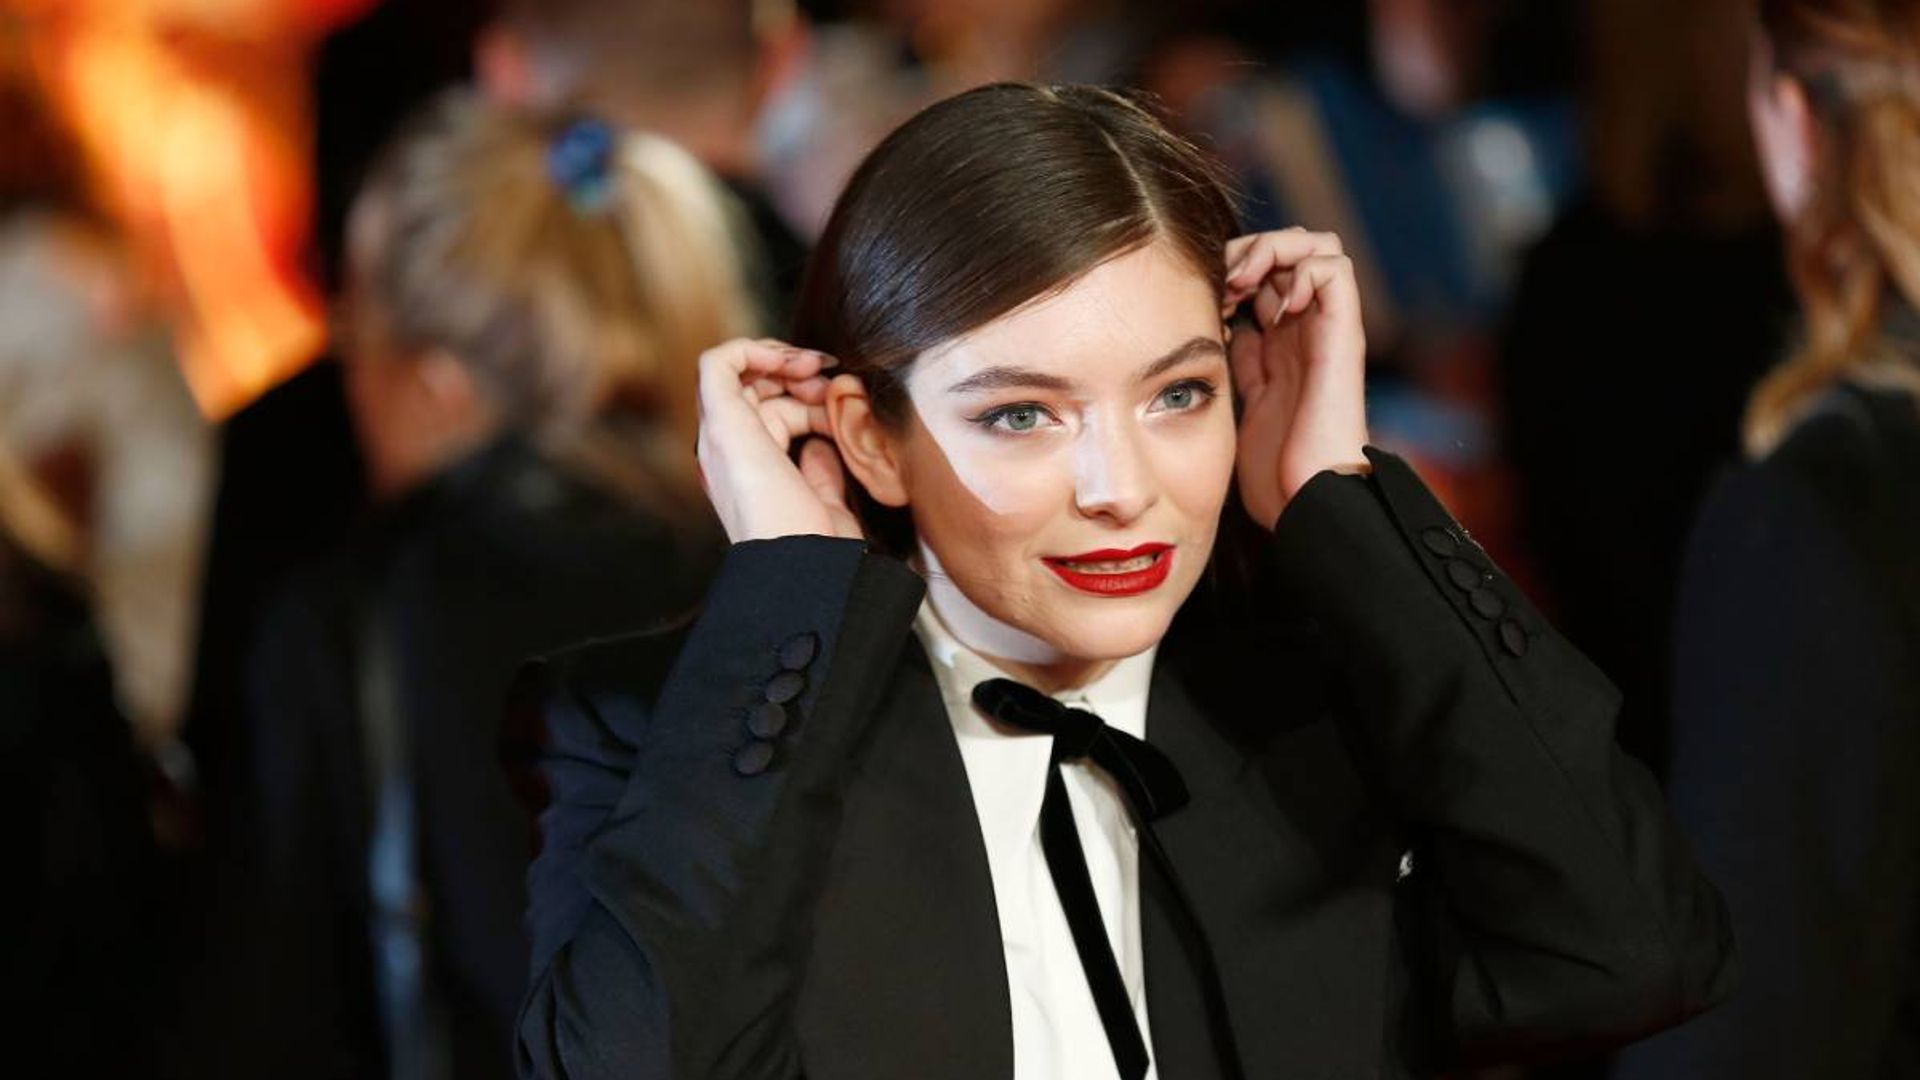 Lorde gets fans talking with dramatic hair transformation no one saw coming 